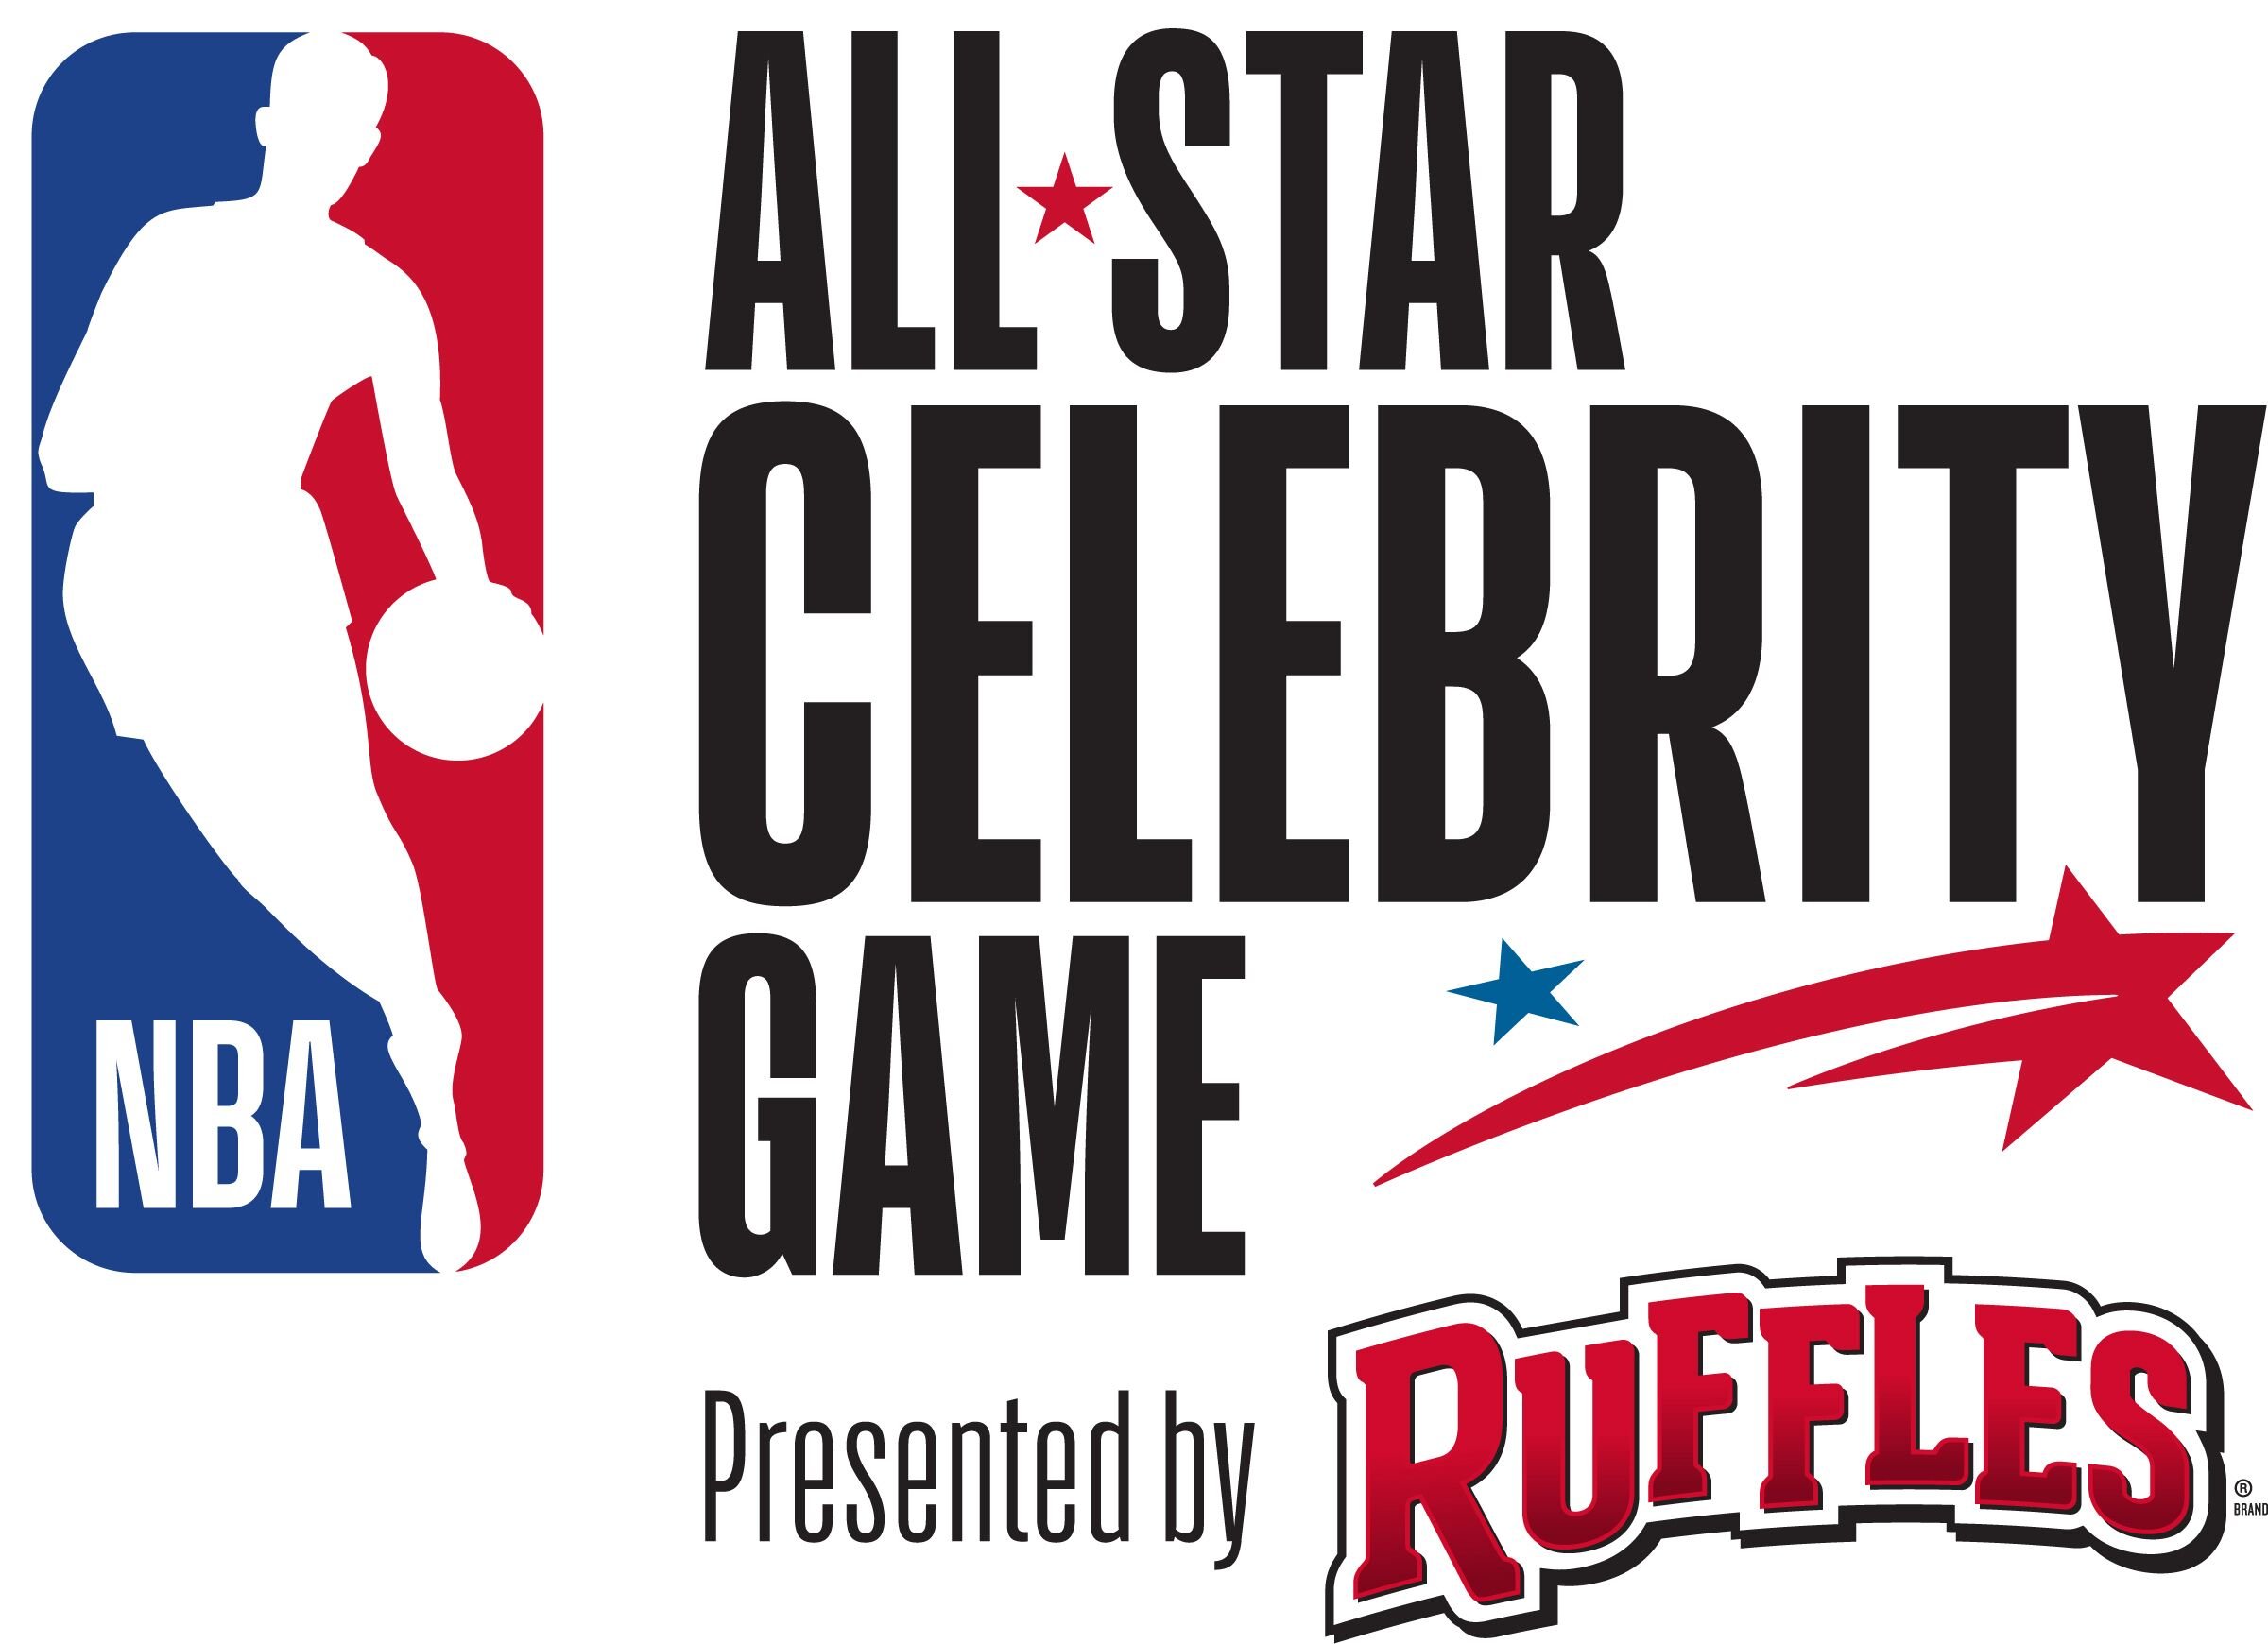 NBA Celebrity AllStar Game Rosters Announced WCCB Charlotte's CW